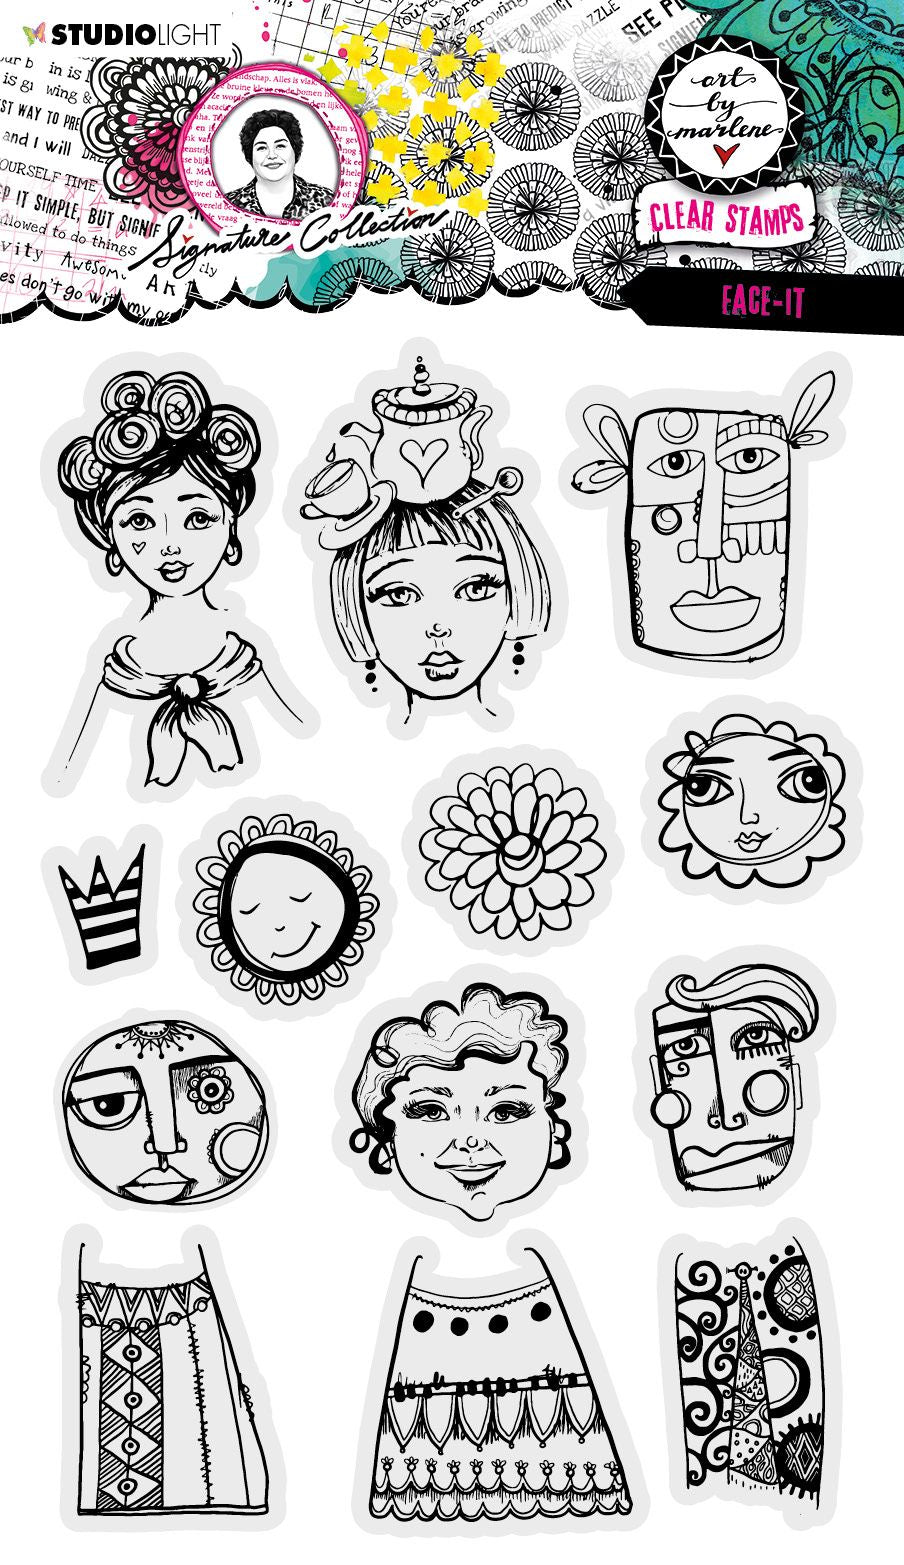 Art By Marlene - Clear Stamp -Face-It